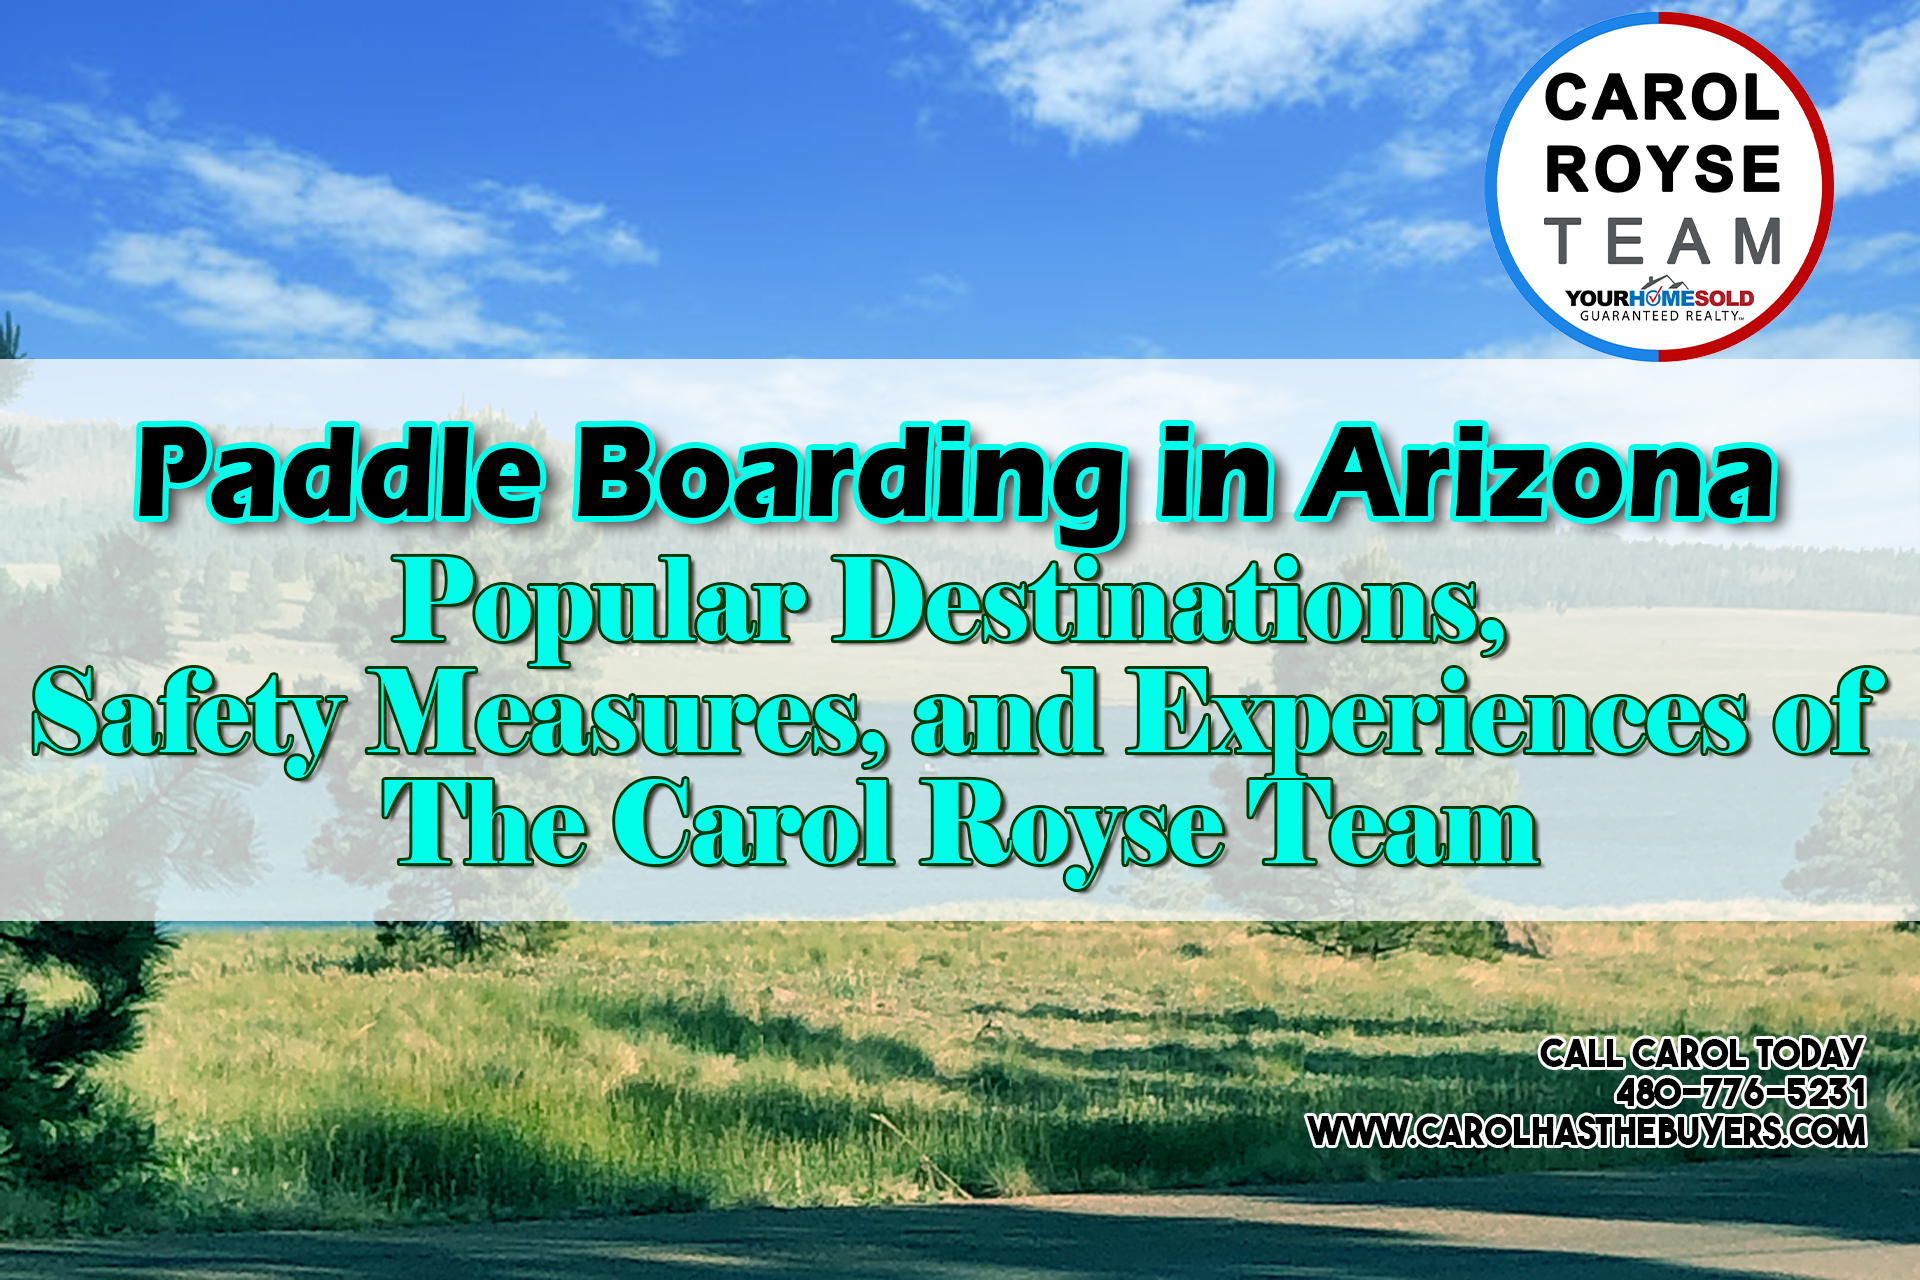 Paddle Boarding in Arizona: Popular Destinations, Safety Measures, and Experiences of the Carol Royse Team